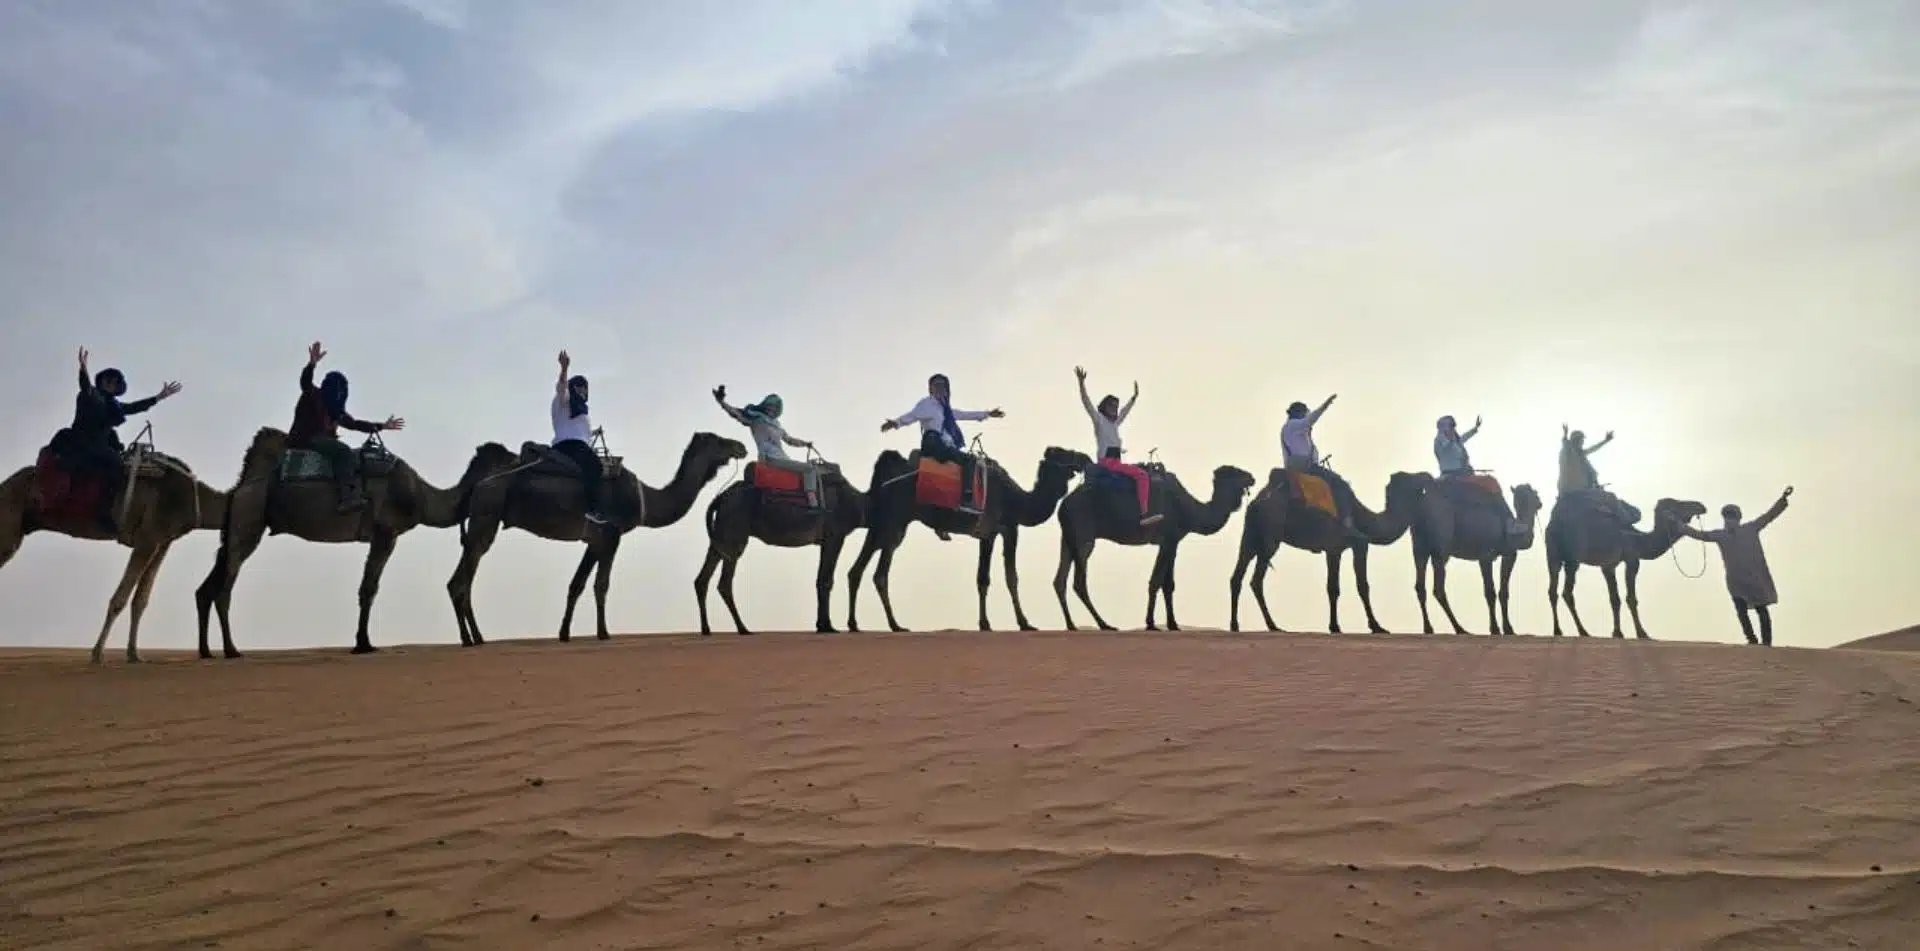 Explore Morocco, on foot and on camel